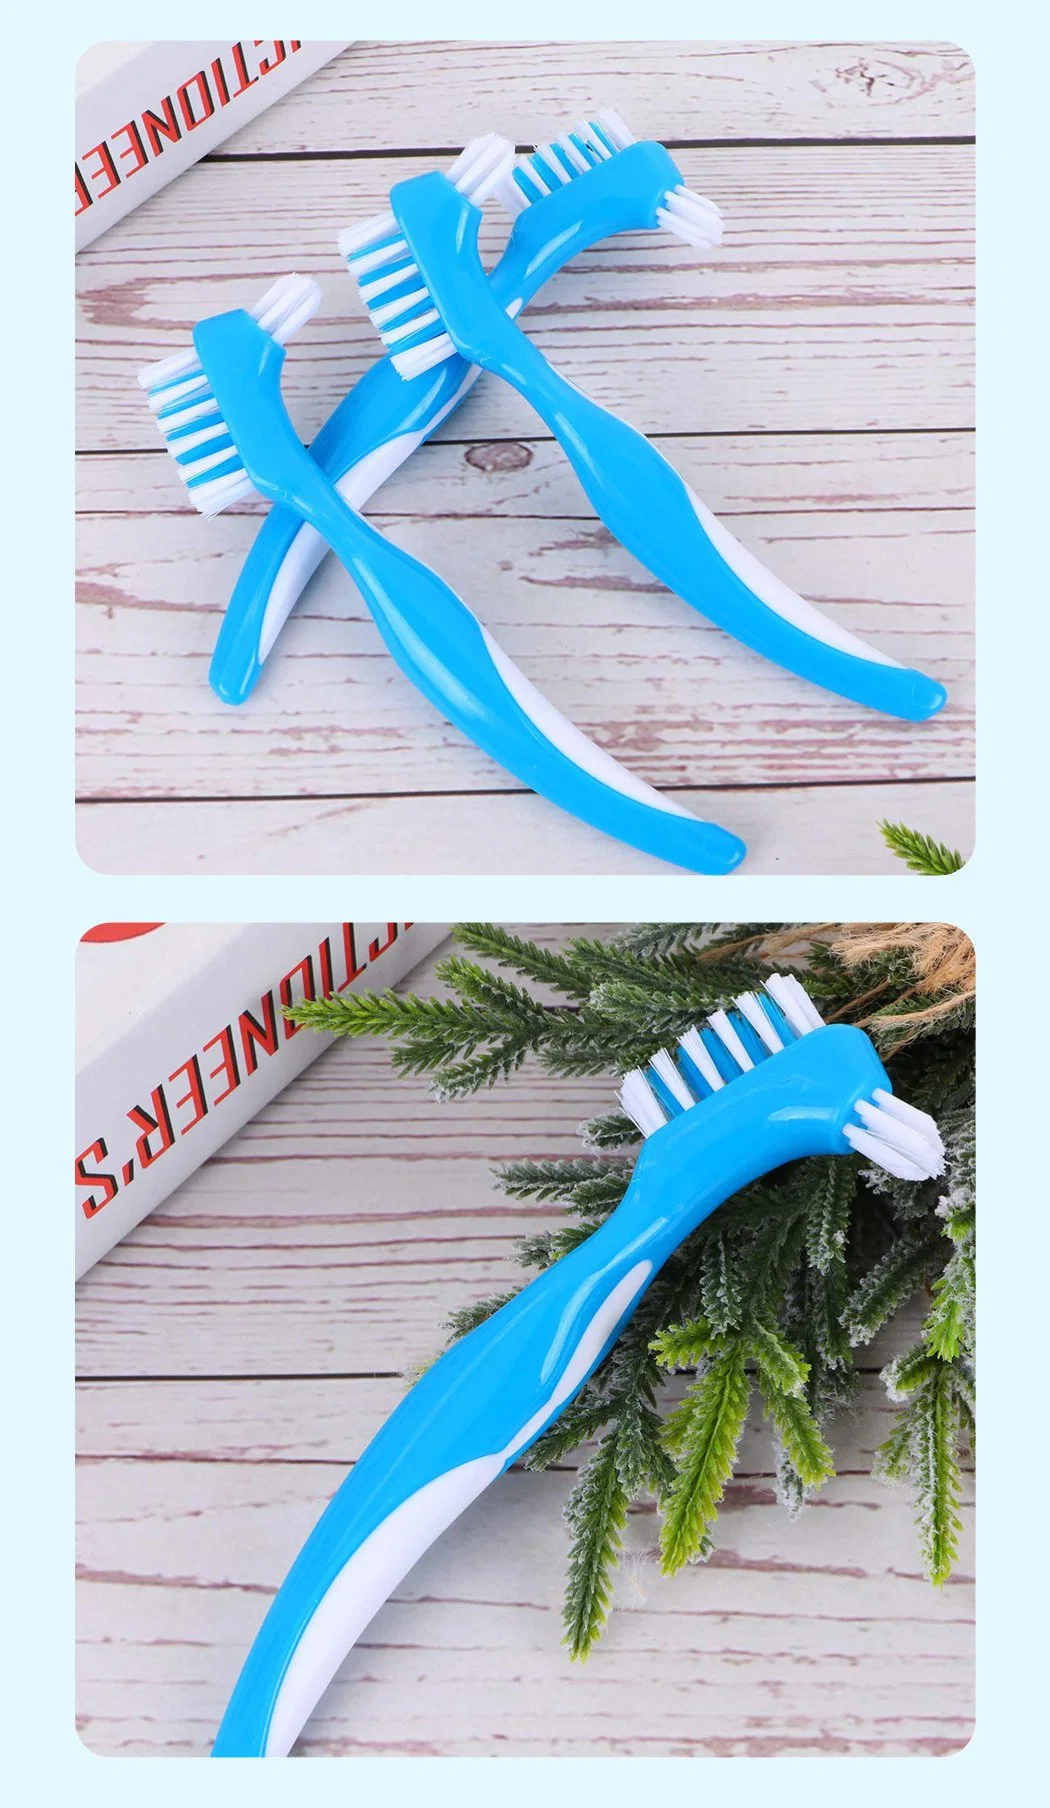 High Quality Denture Oral Hygiene Deep Cleaning Denture Toothbrush